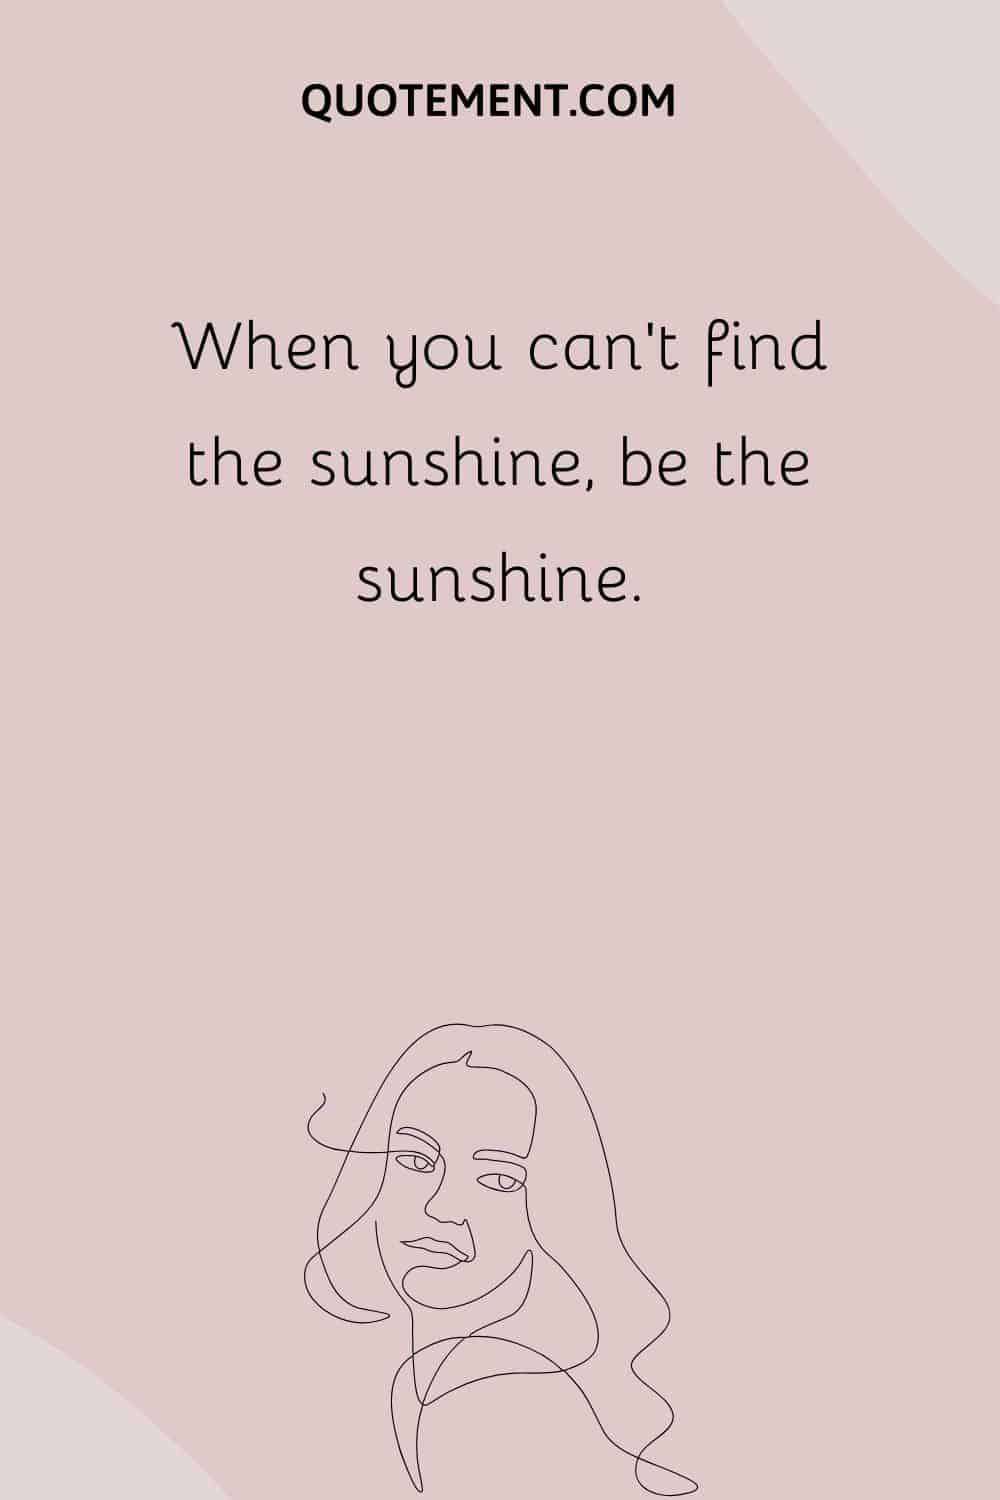 When you can’t find the sunshine, be the sunshine.